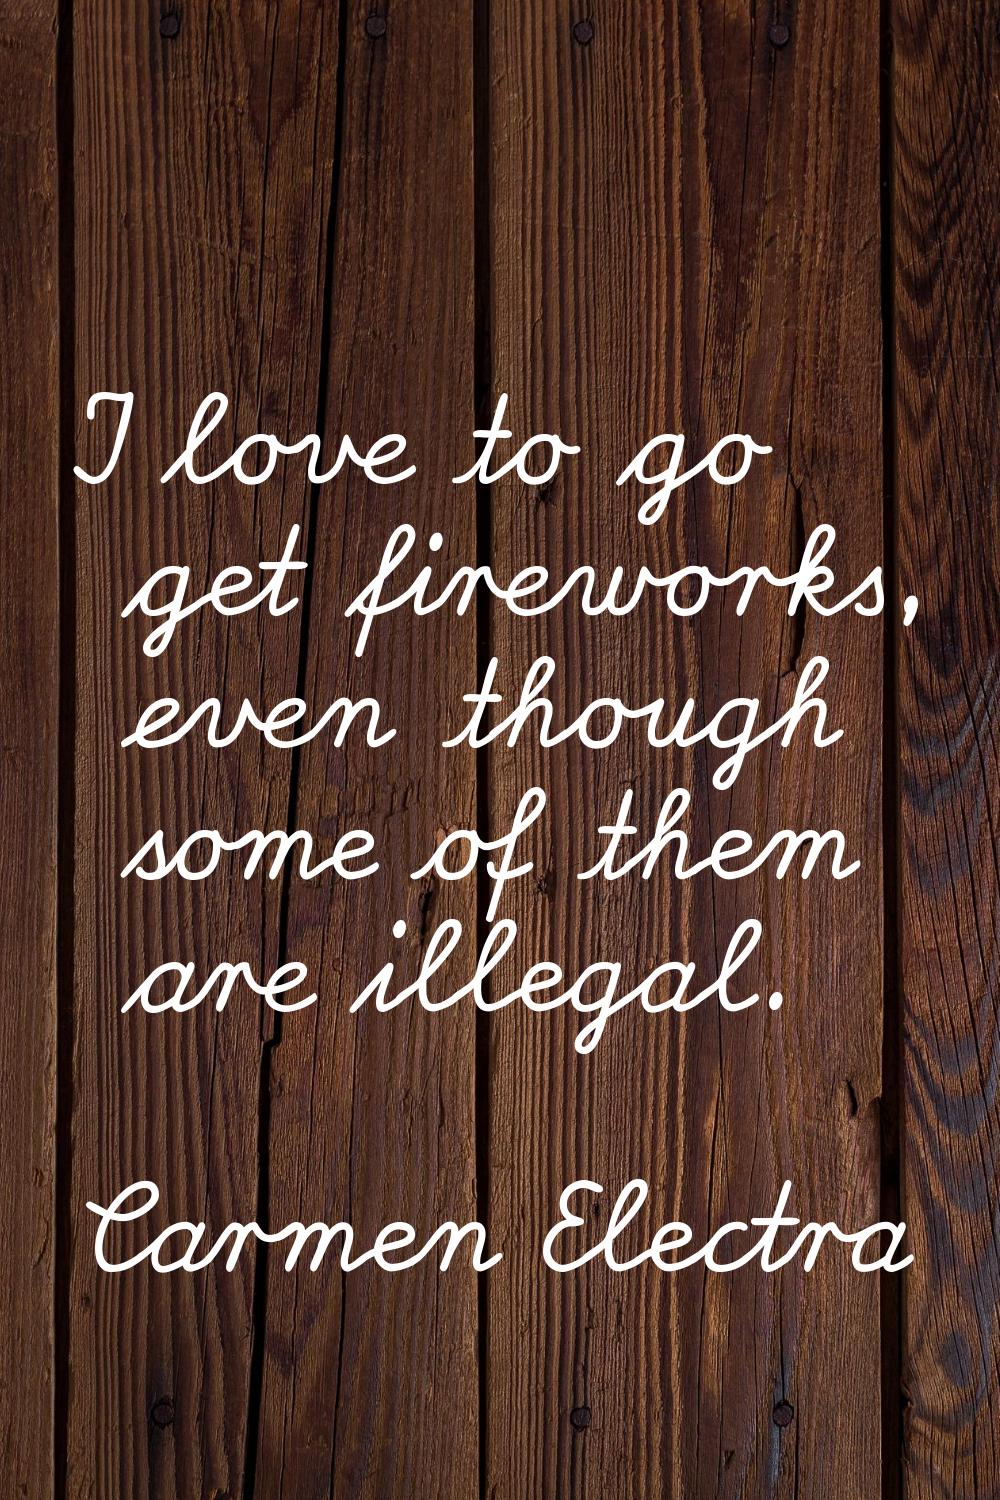 I love to go get fireworks, even though some of them are illegal.